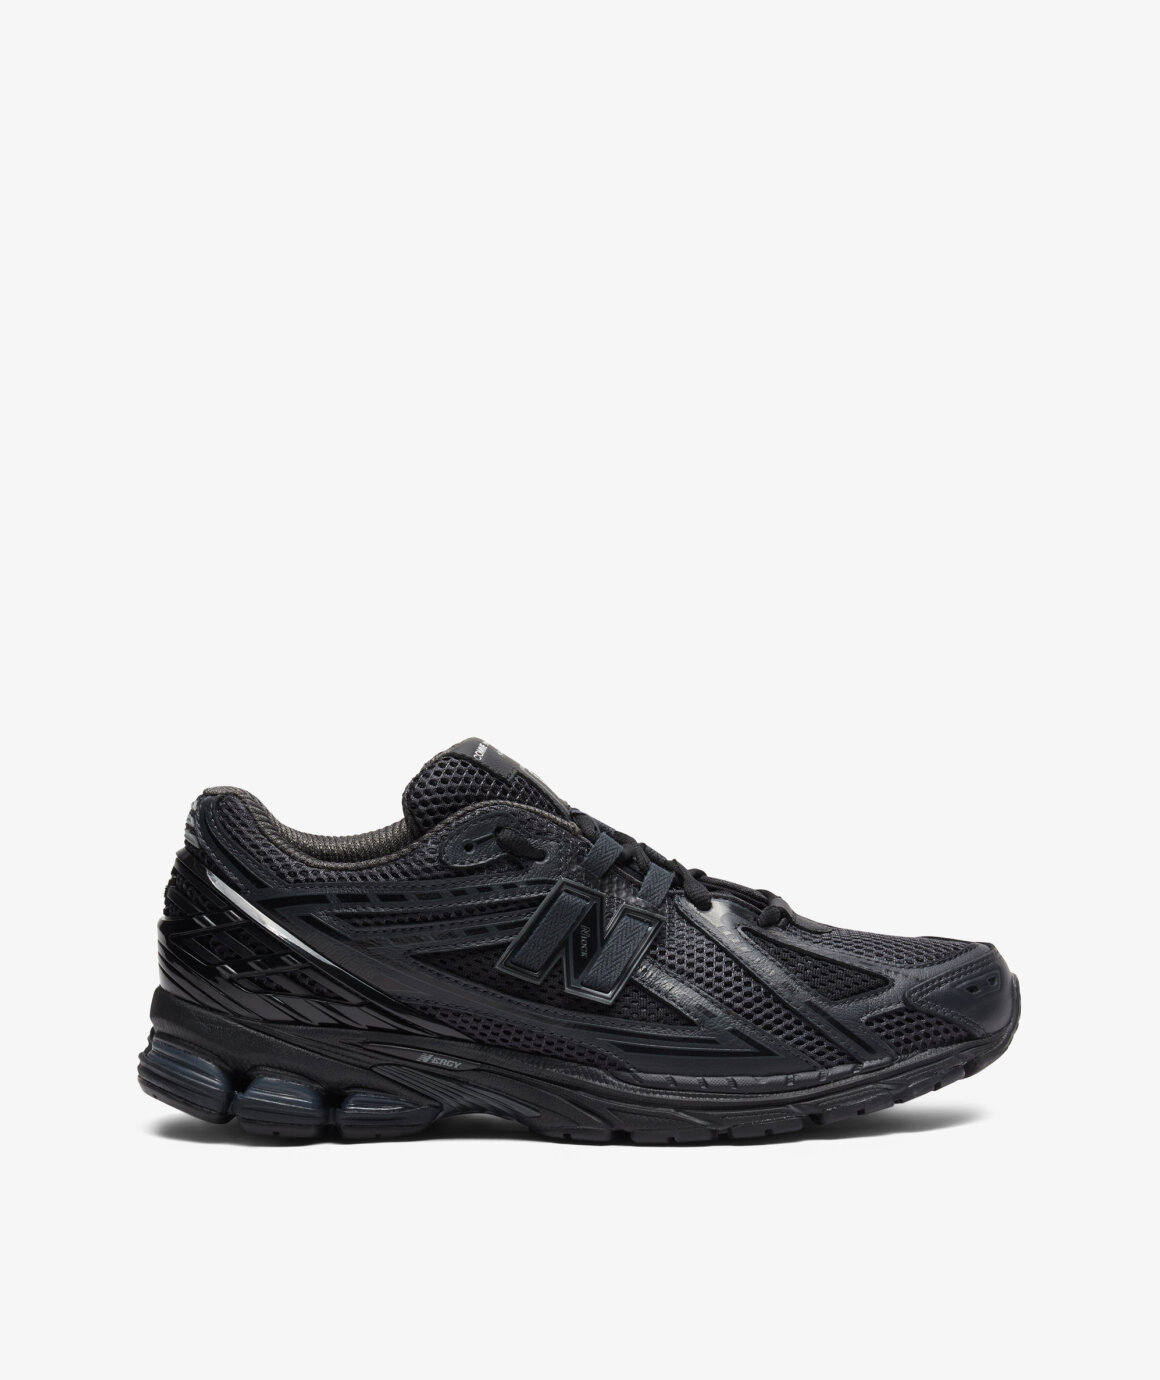 Norse Store | Shipping Worldwide - Comme Des Garcons Homme CDGH x NB ...